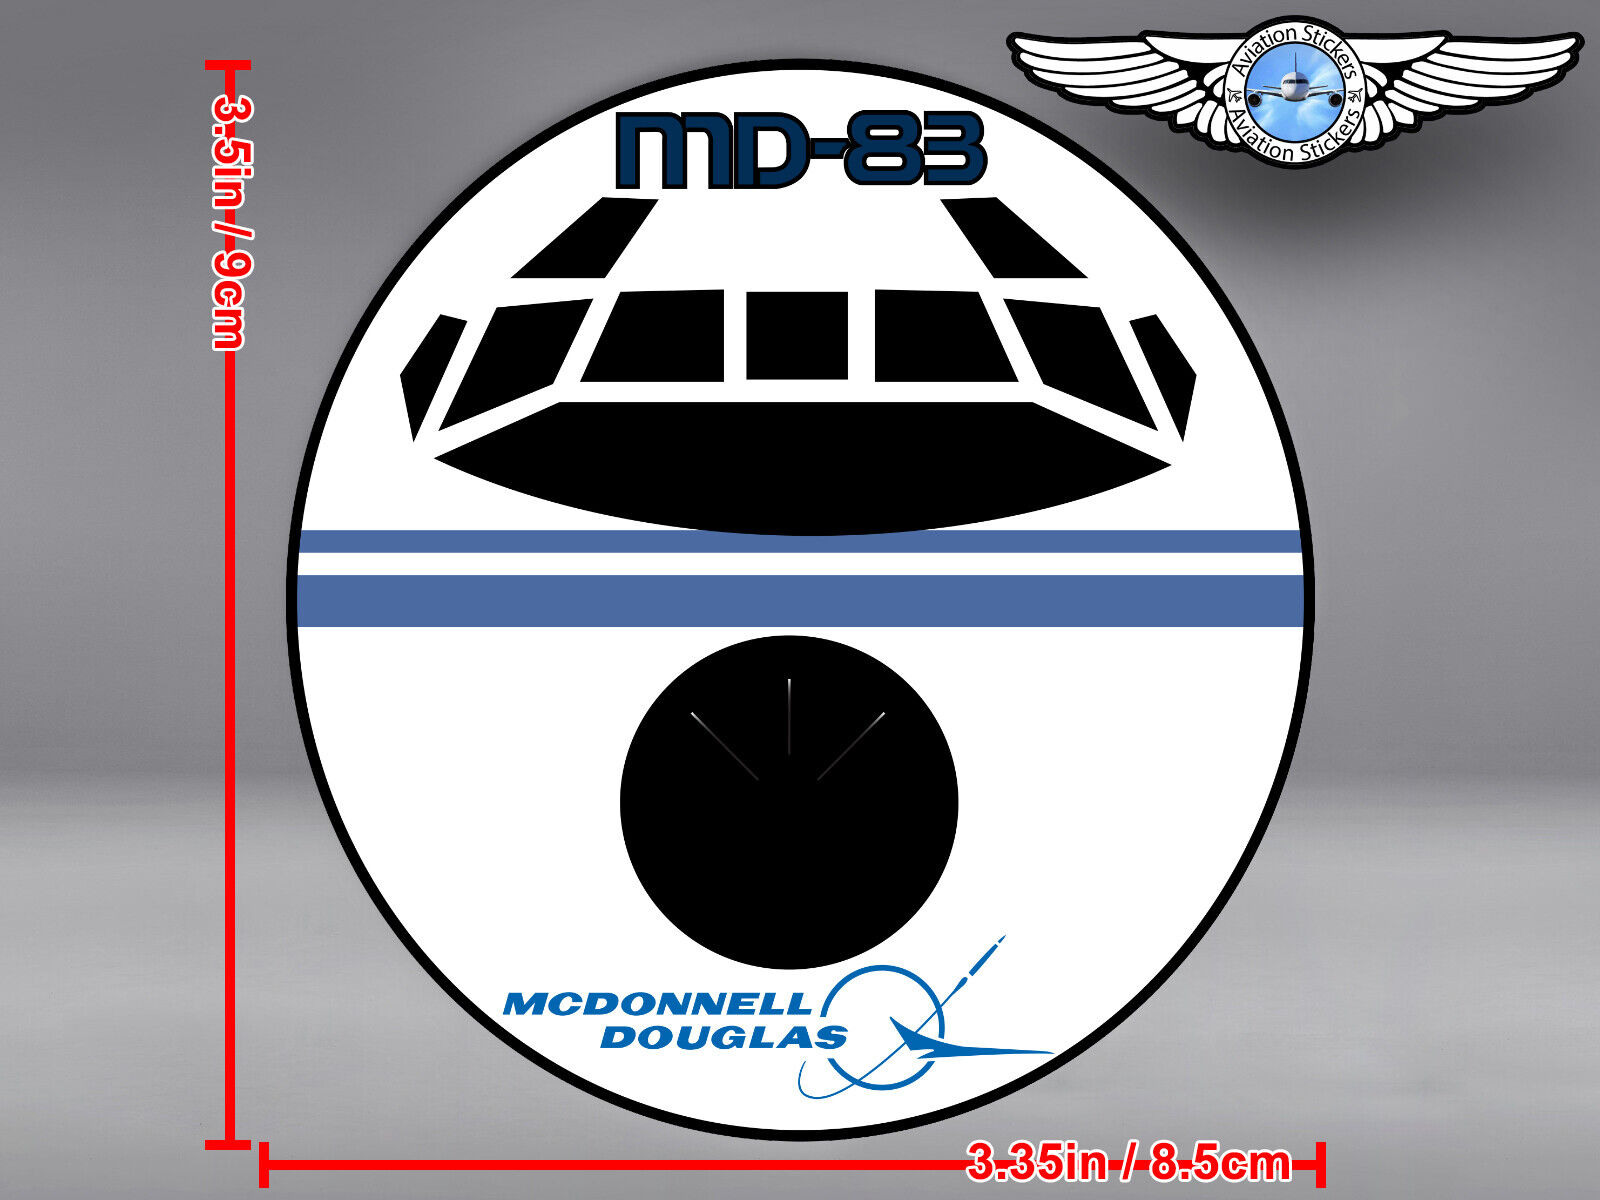 MCDONNELL DOUGLAS MD83 MD83 MD-83 FRONT VIEW DECAL / STICKER